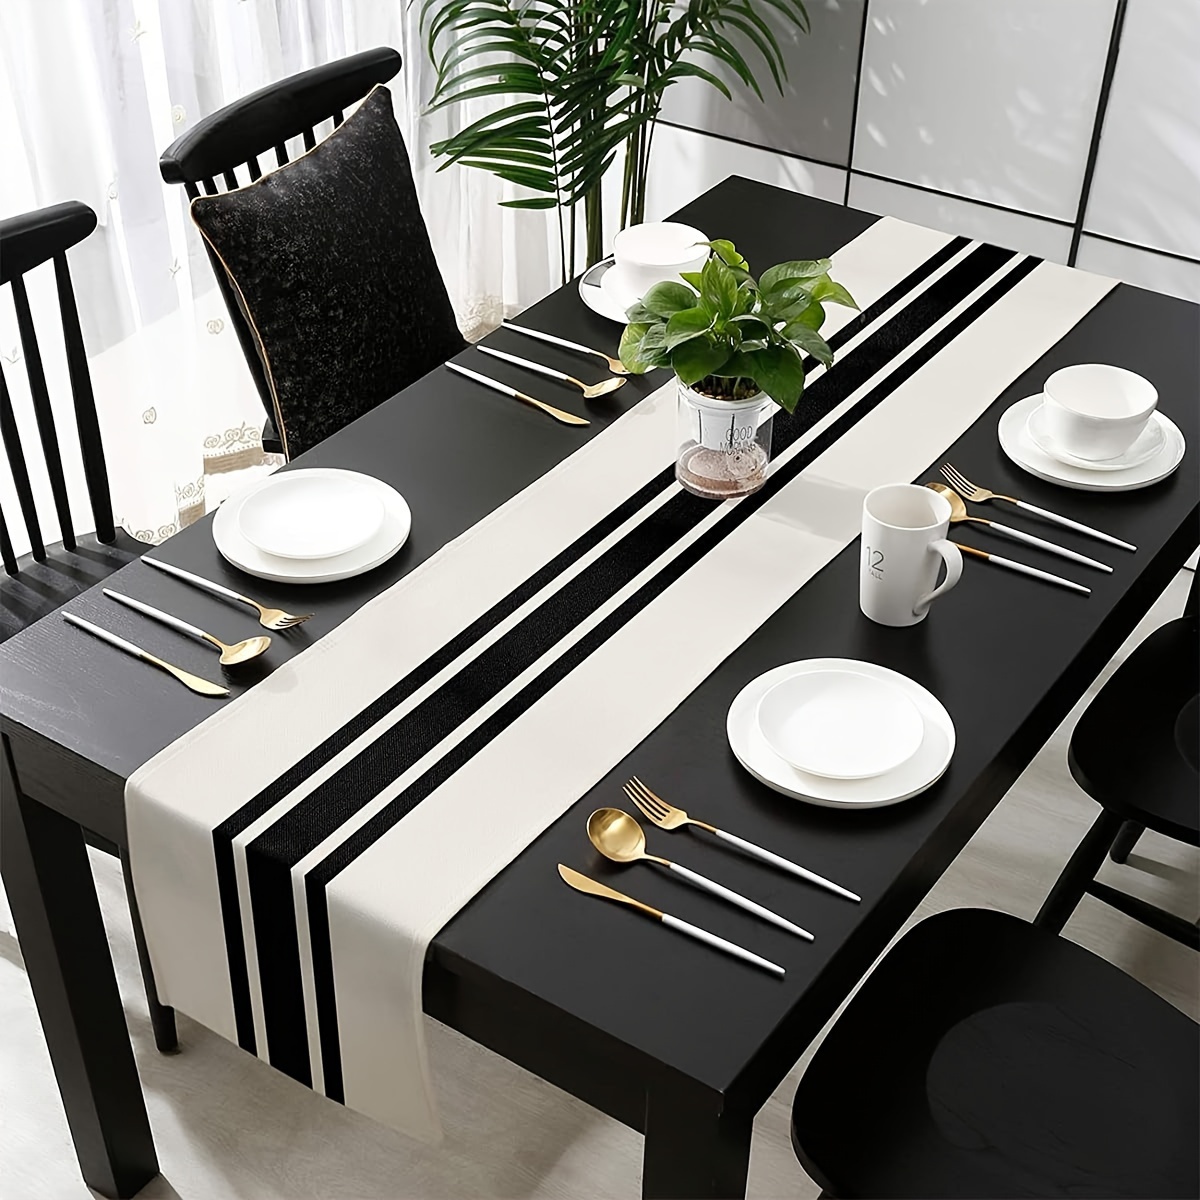 

1pc Table Runner, Modern Farmhouse Tablecloths, Black And Beige Striped Tablecloths, Suitable For Bohemian Rural Family Dining Tables, 33cm*183cm/13in*72in, Home Decor, Home Supplies